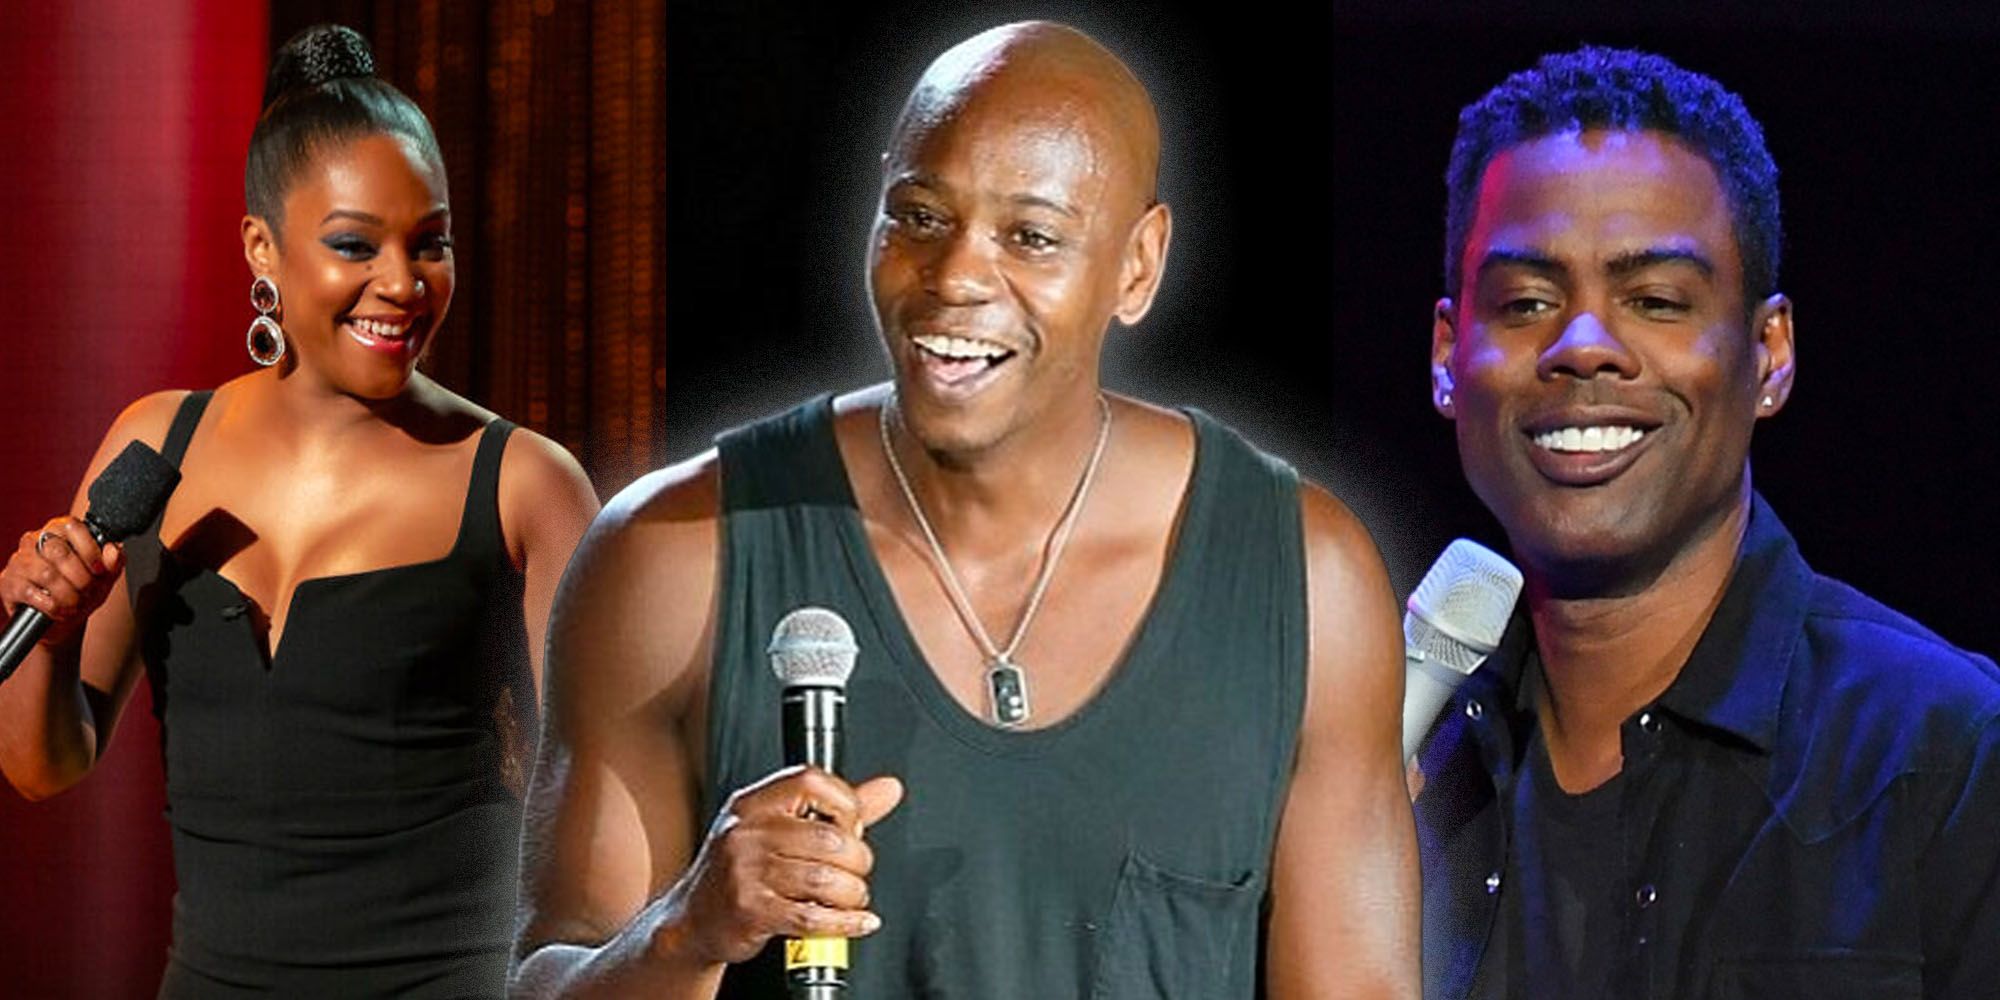 A collage of Tiffany Haddish, Dave Chappelle and chris Rock doing stand-up